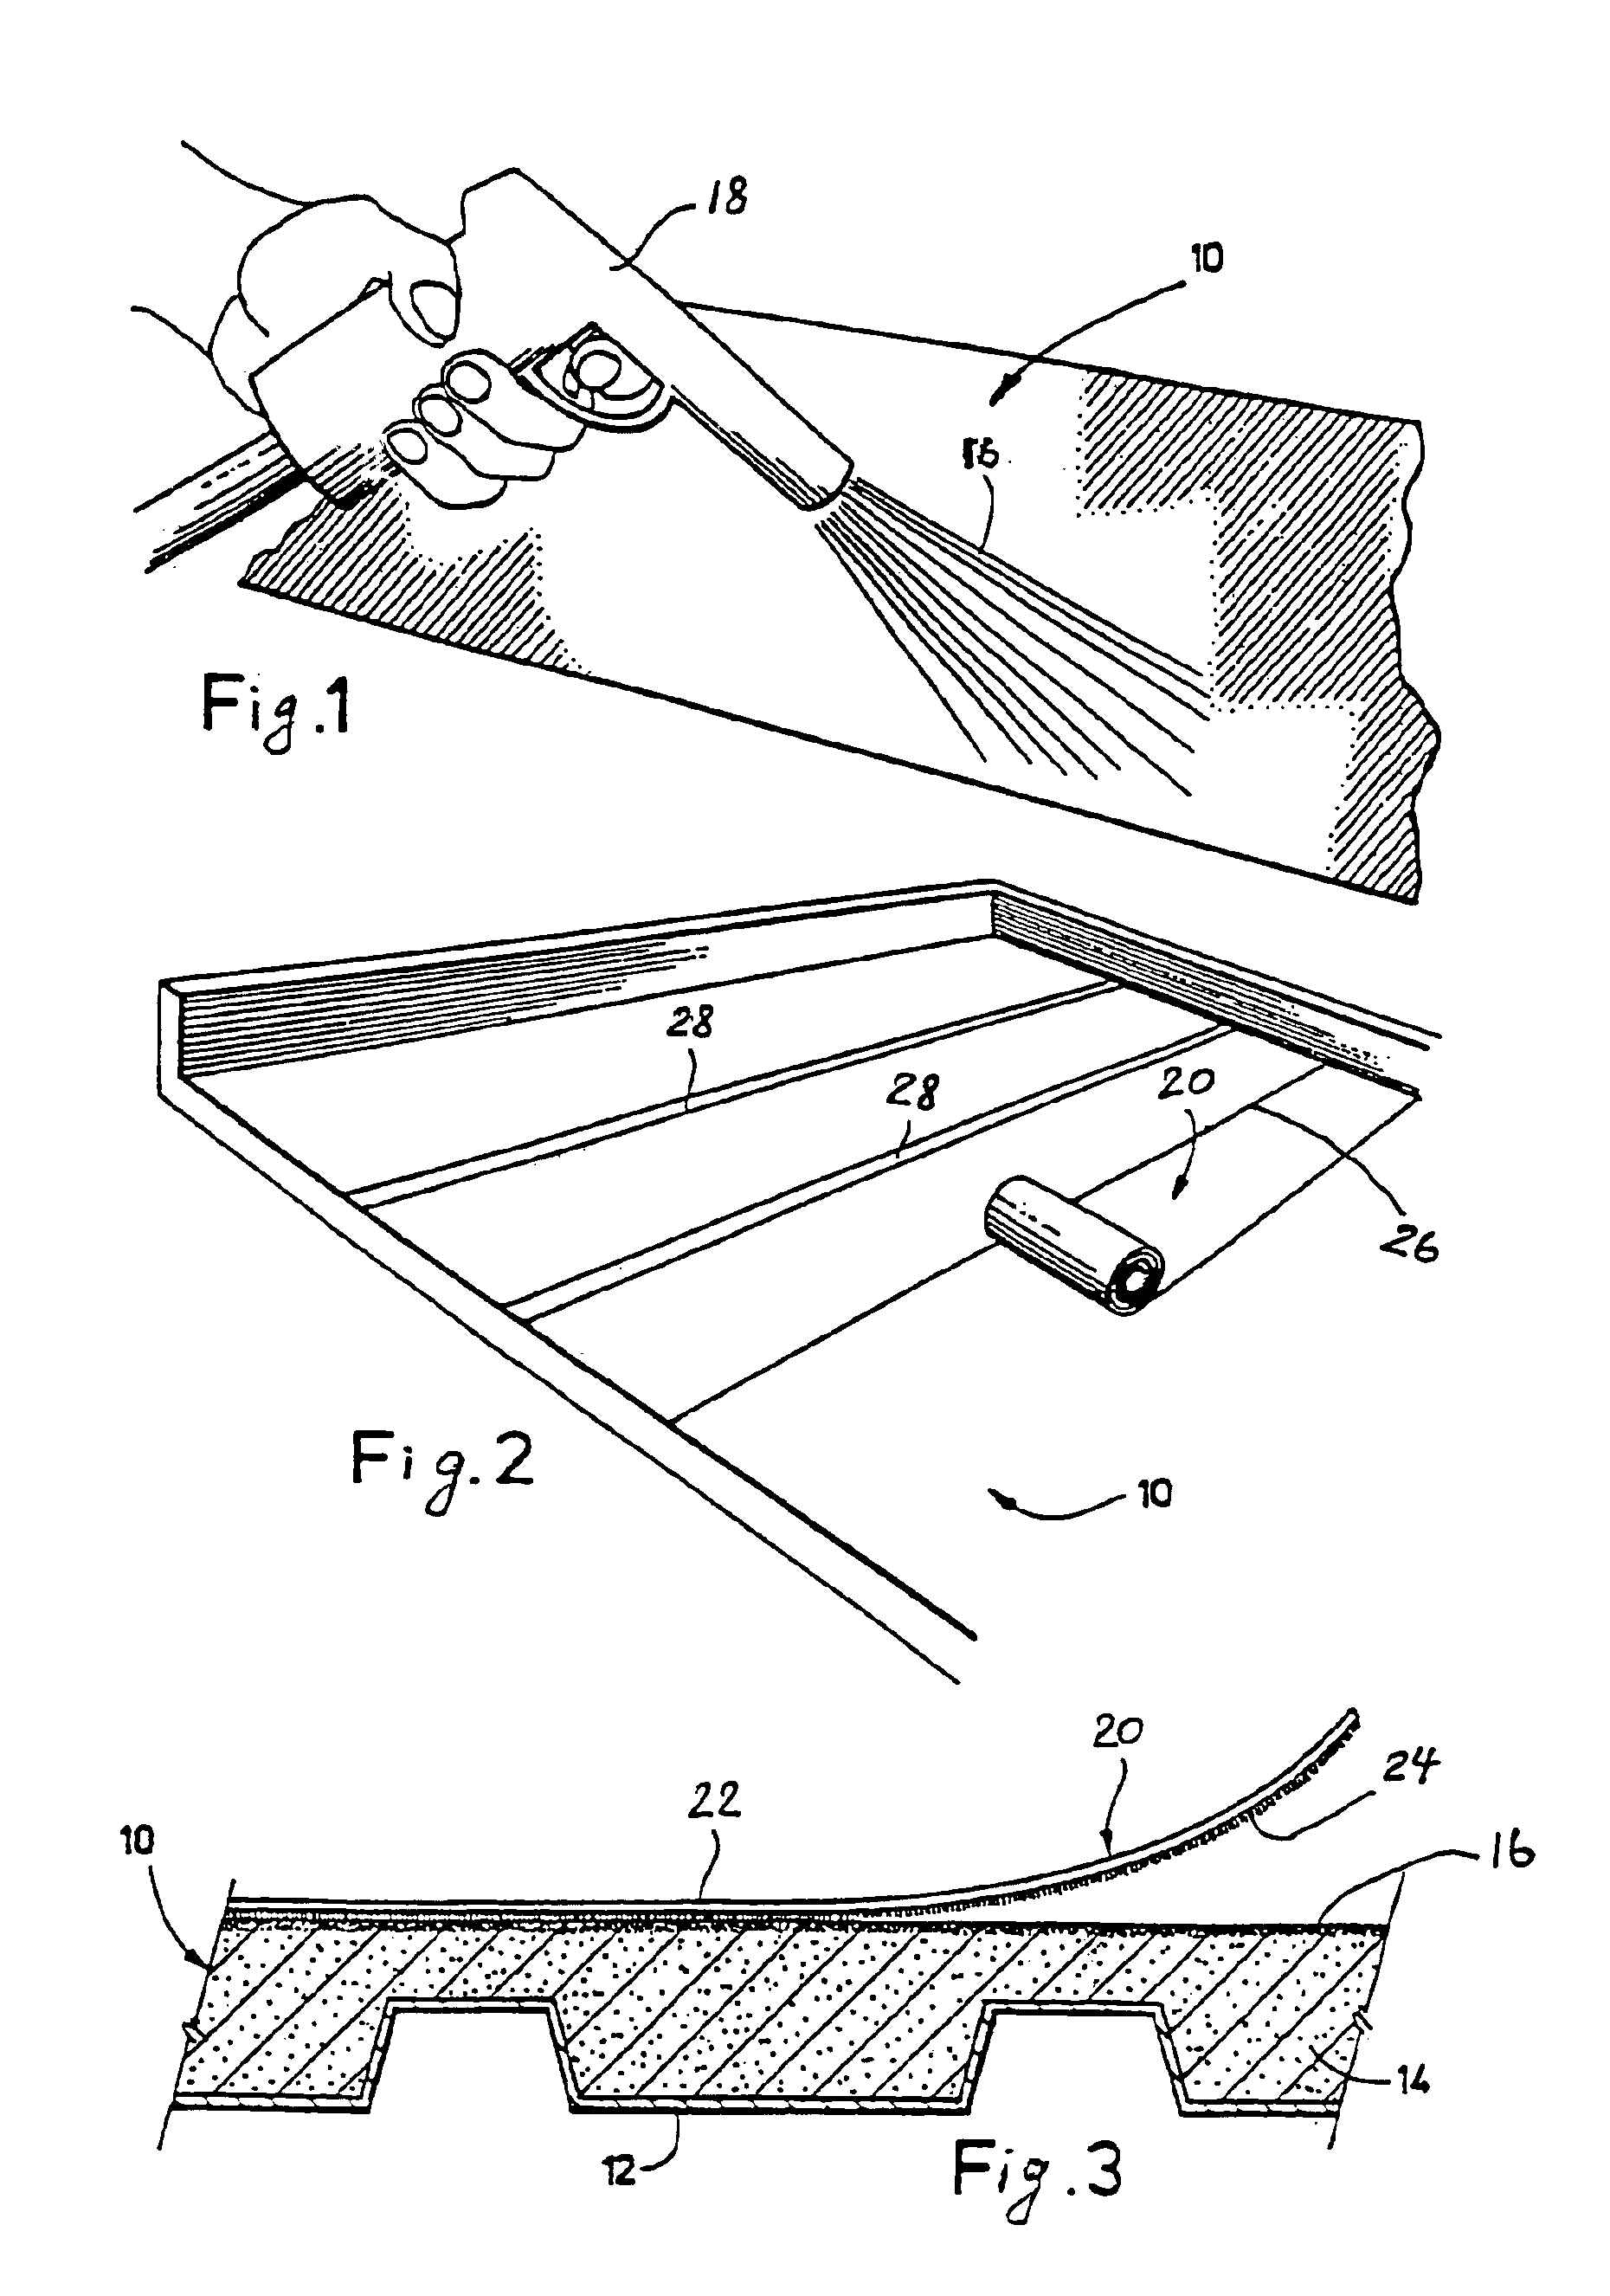 Non-cellular adhesive for composite roof structure